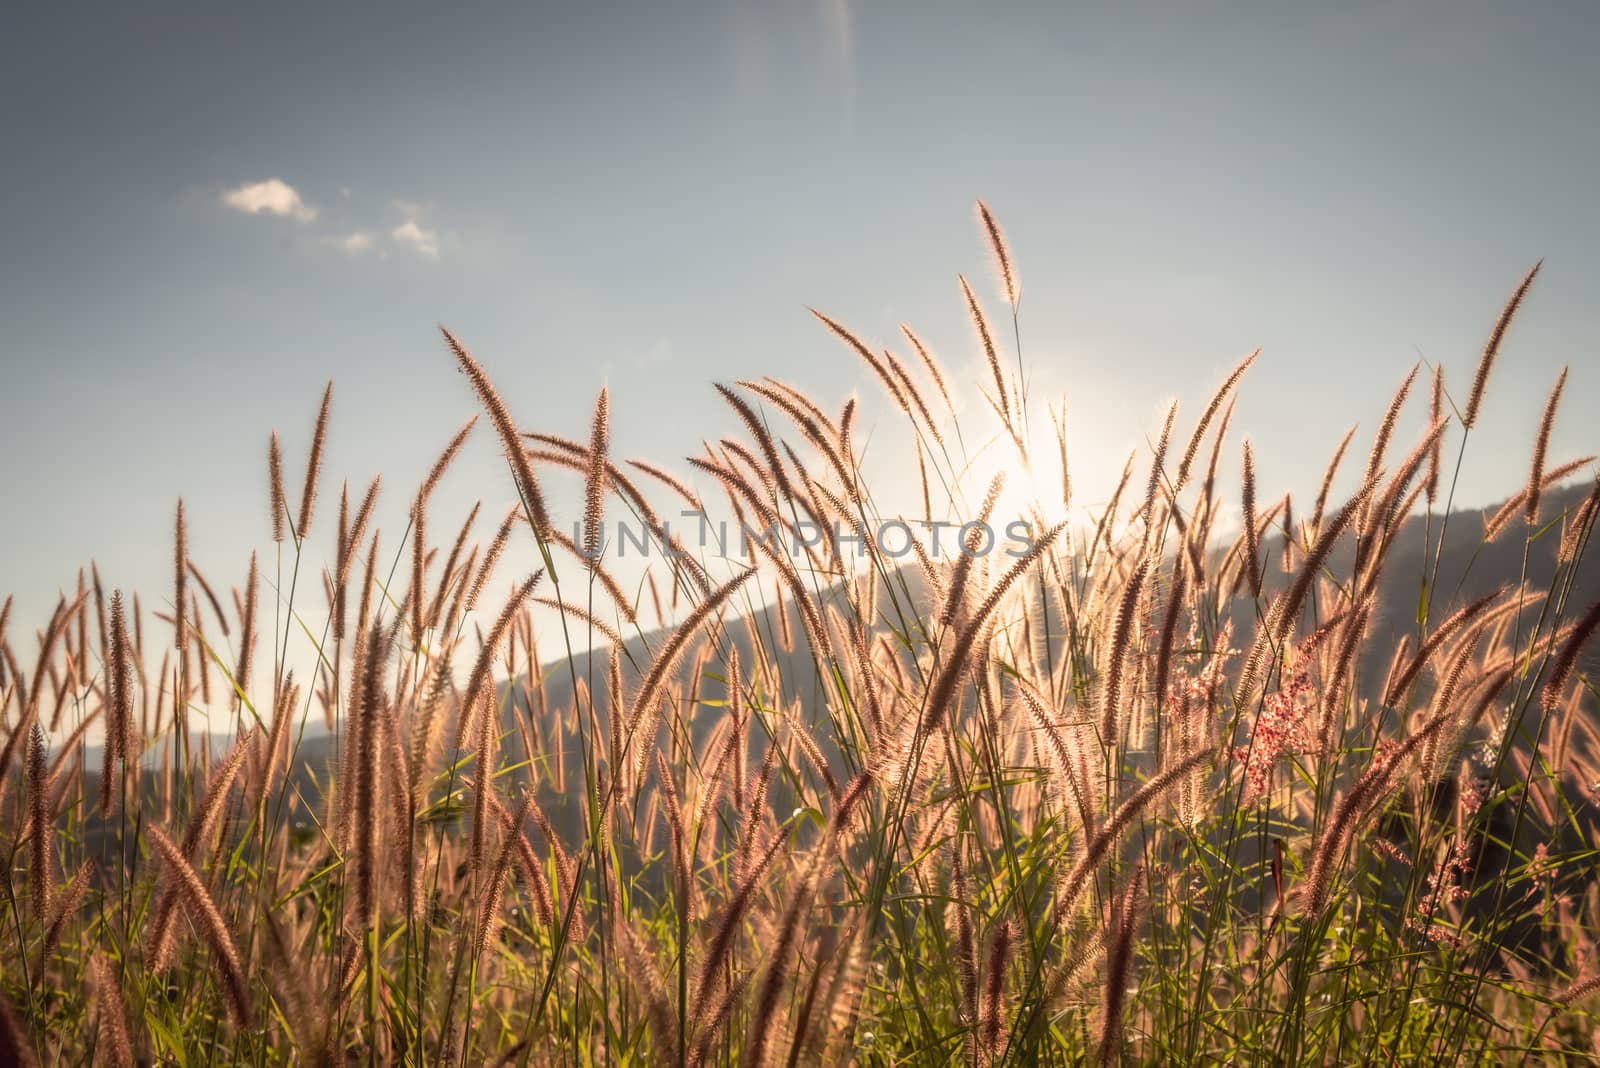 Natural Background of Grass Flowers Field at Sunset Scenery, Nature Landscape of Meadow Fields With Sunlight. Beautiful Spring Grass Flower on Mountains Scenic Backgrounds